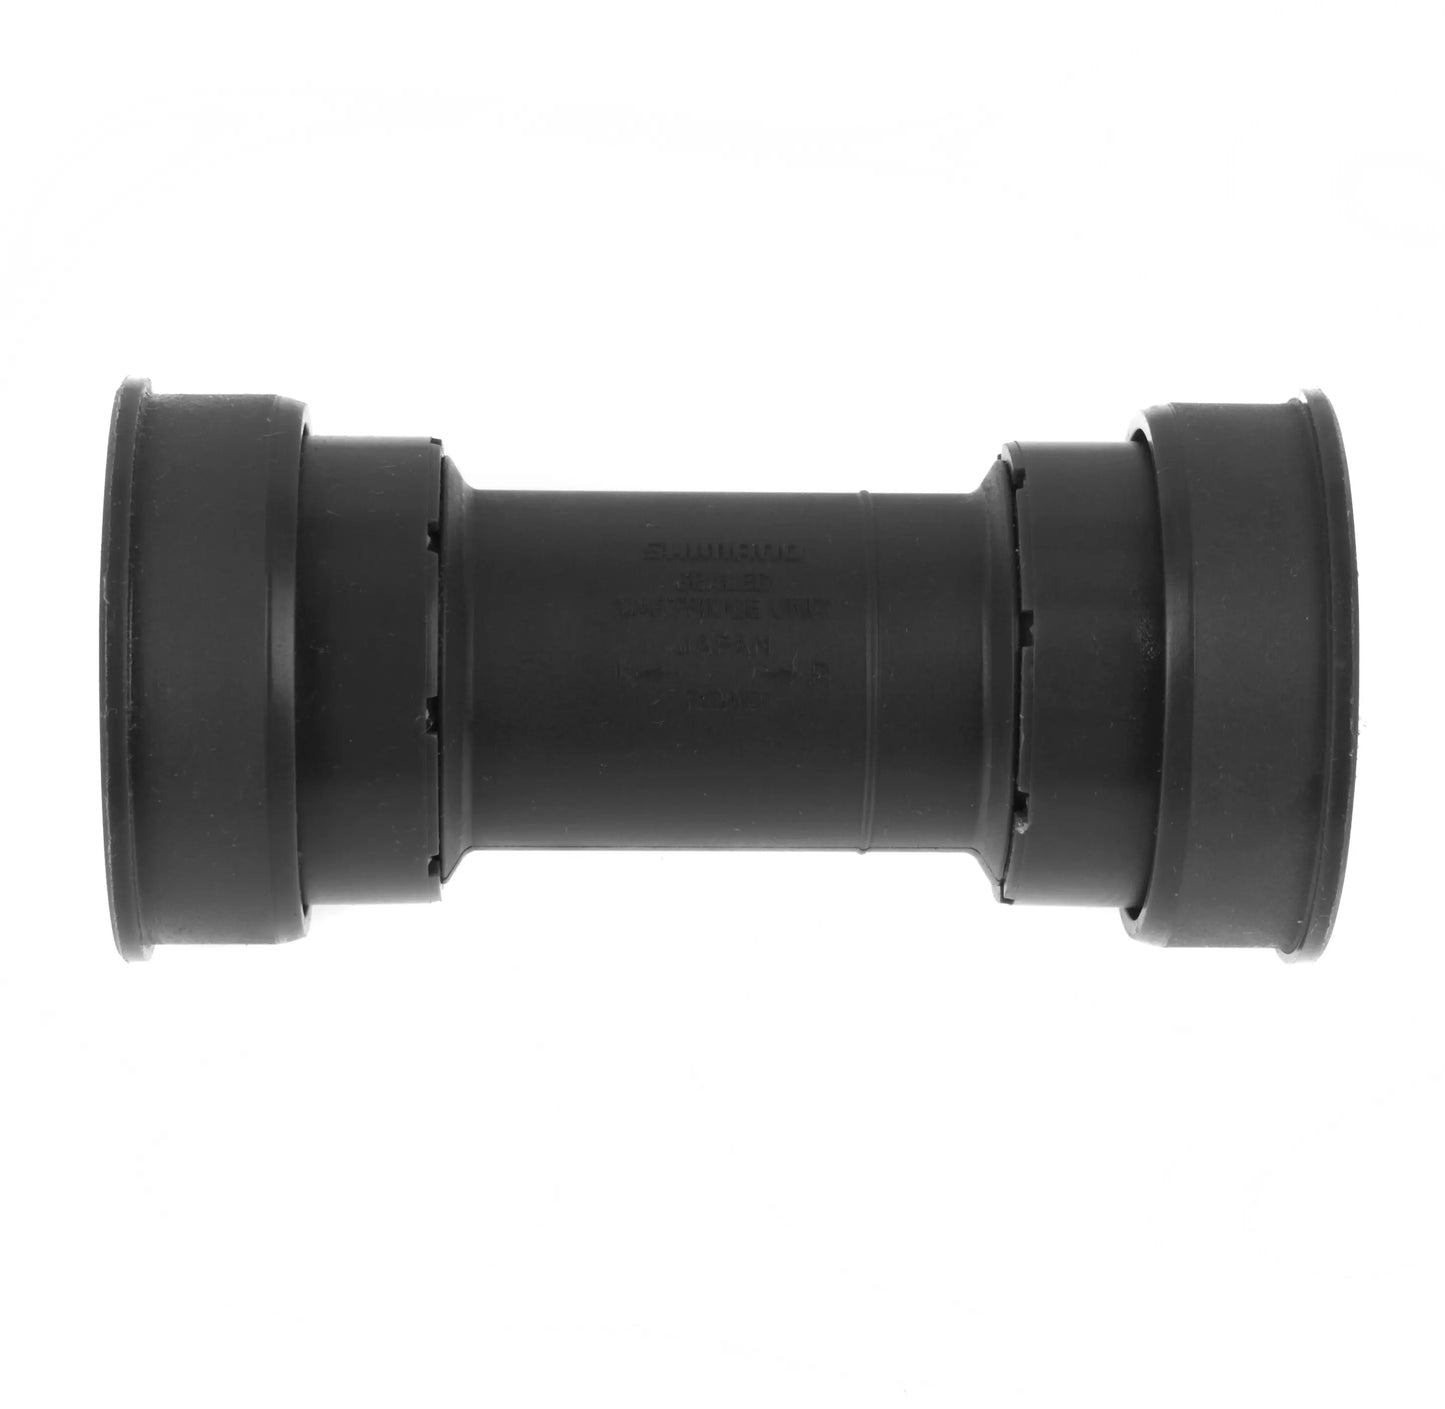 Shimano SM-BB71 Road press fit bottom bracket with inner cover, for 86.5 mm Shimano